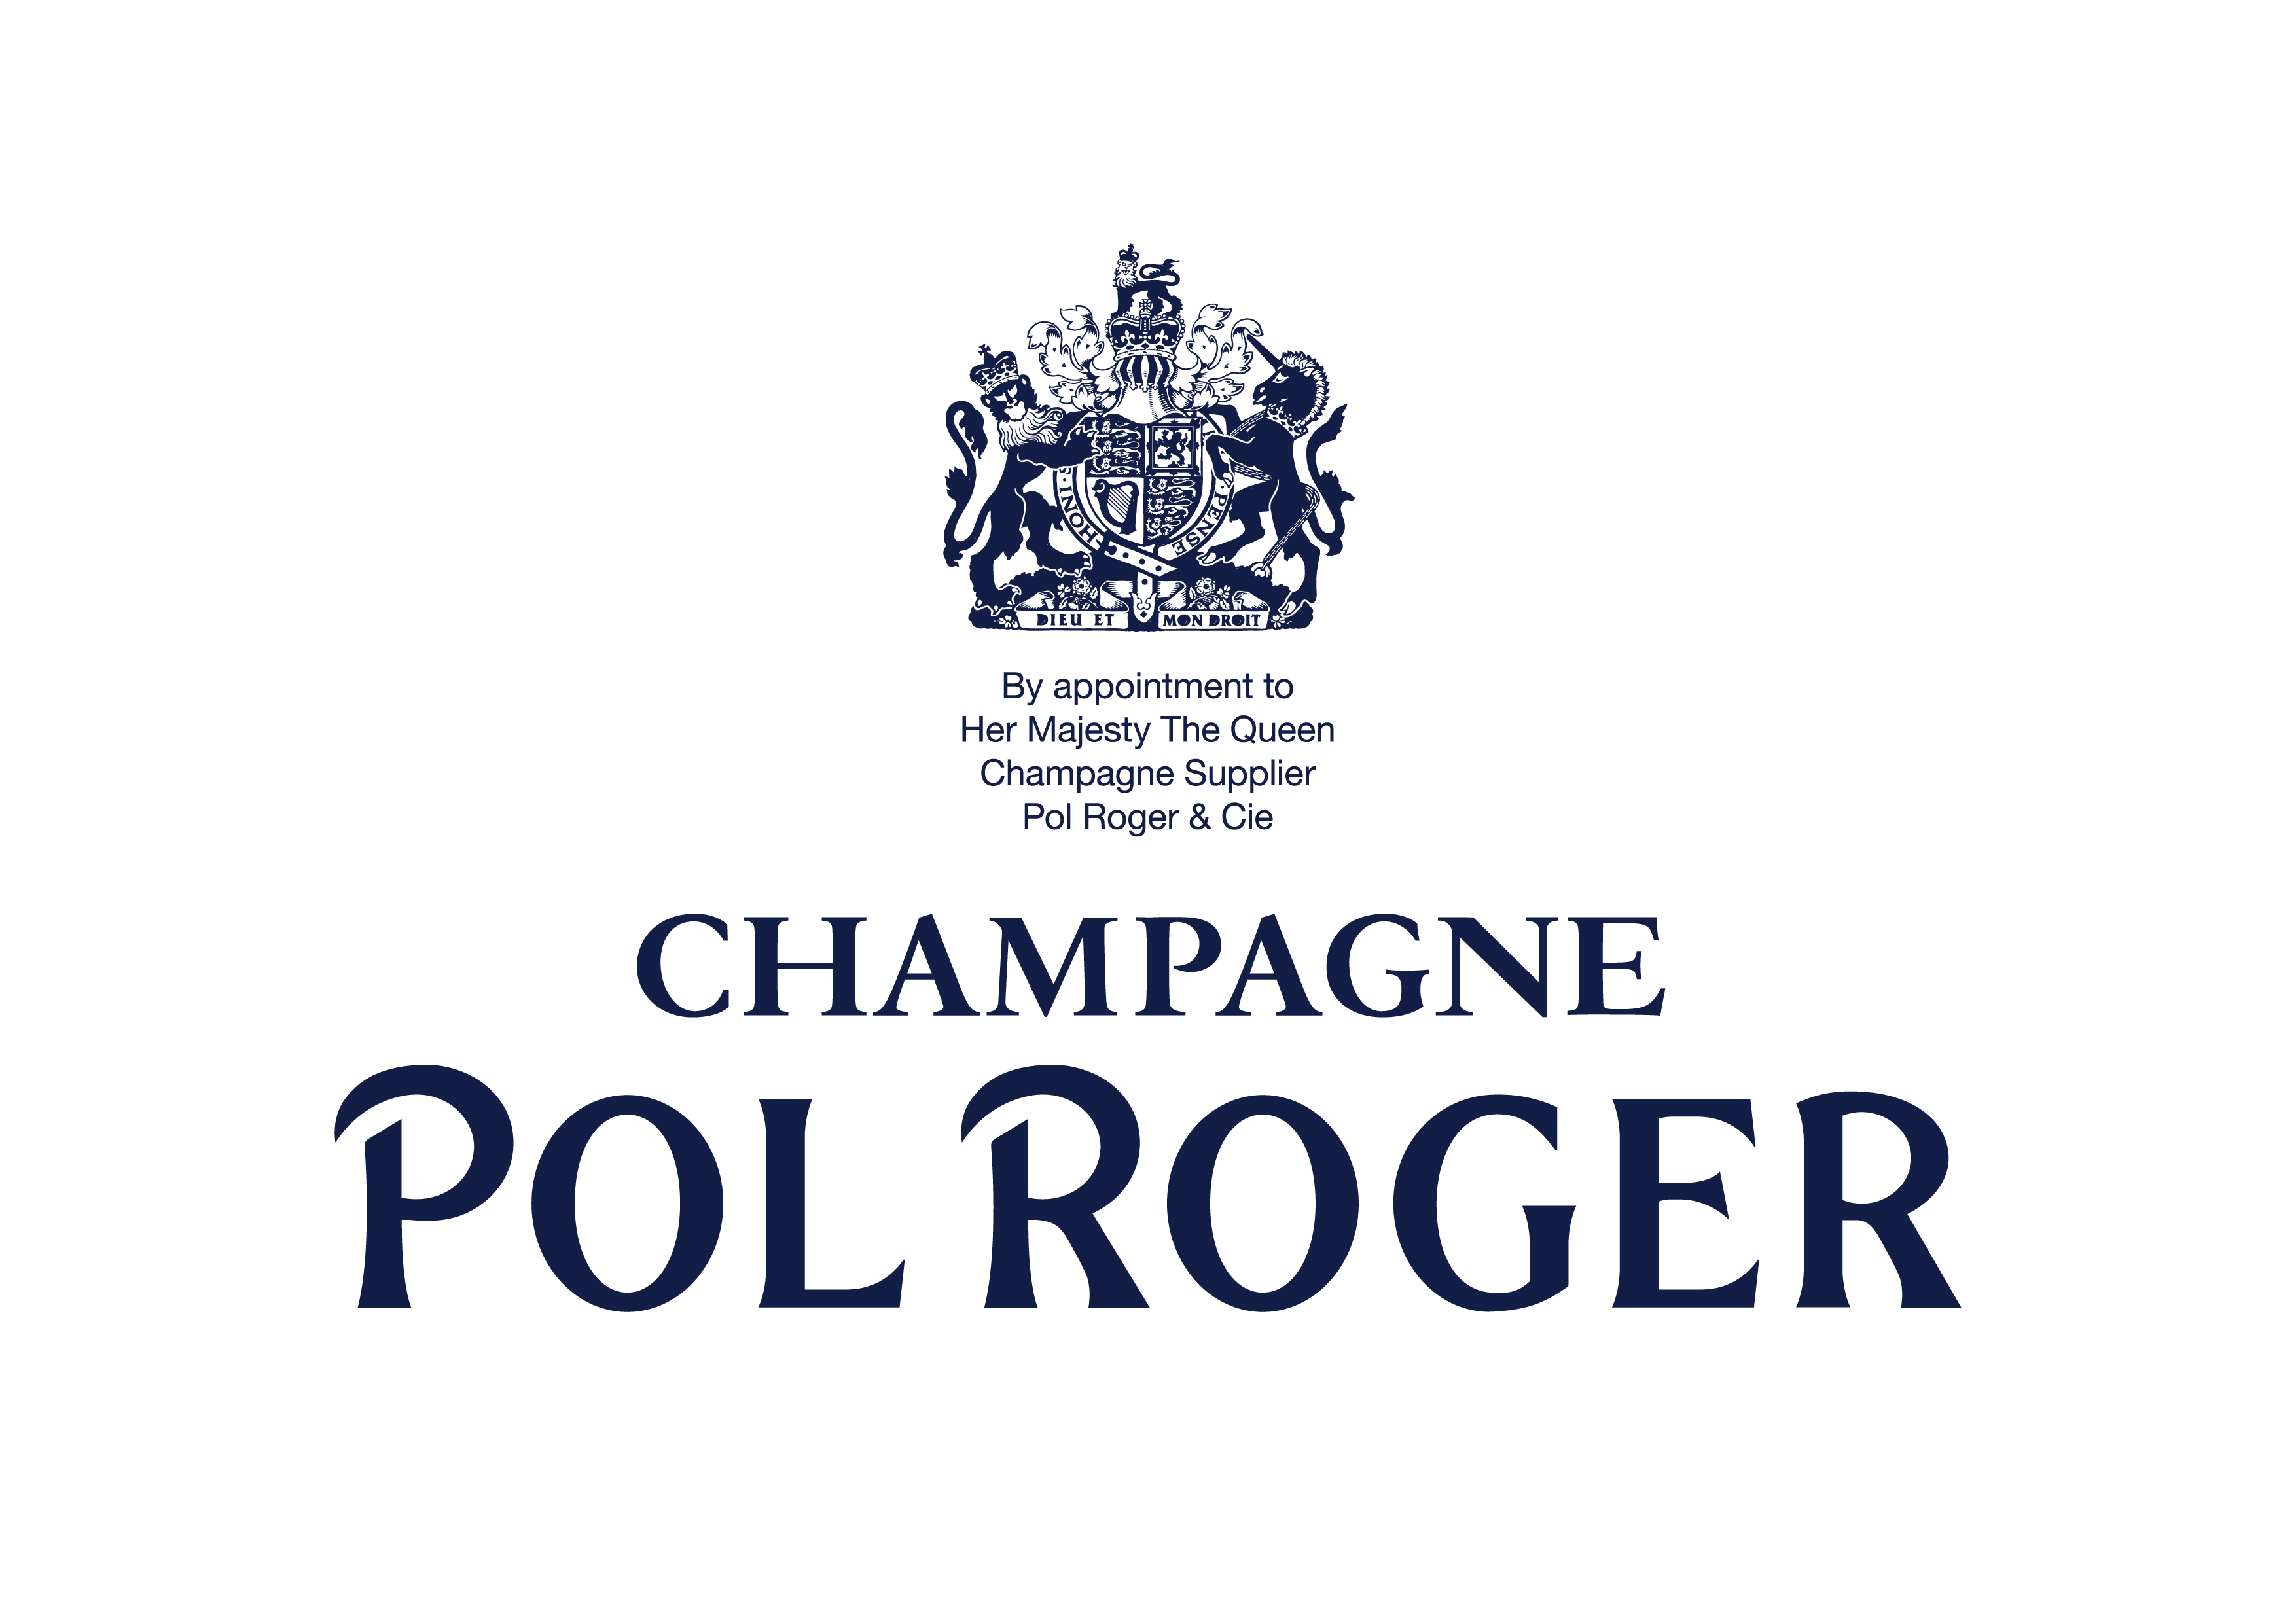 Pol Roger Champagne  - Sponsor of Tennis and Rackets